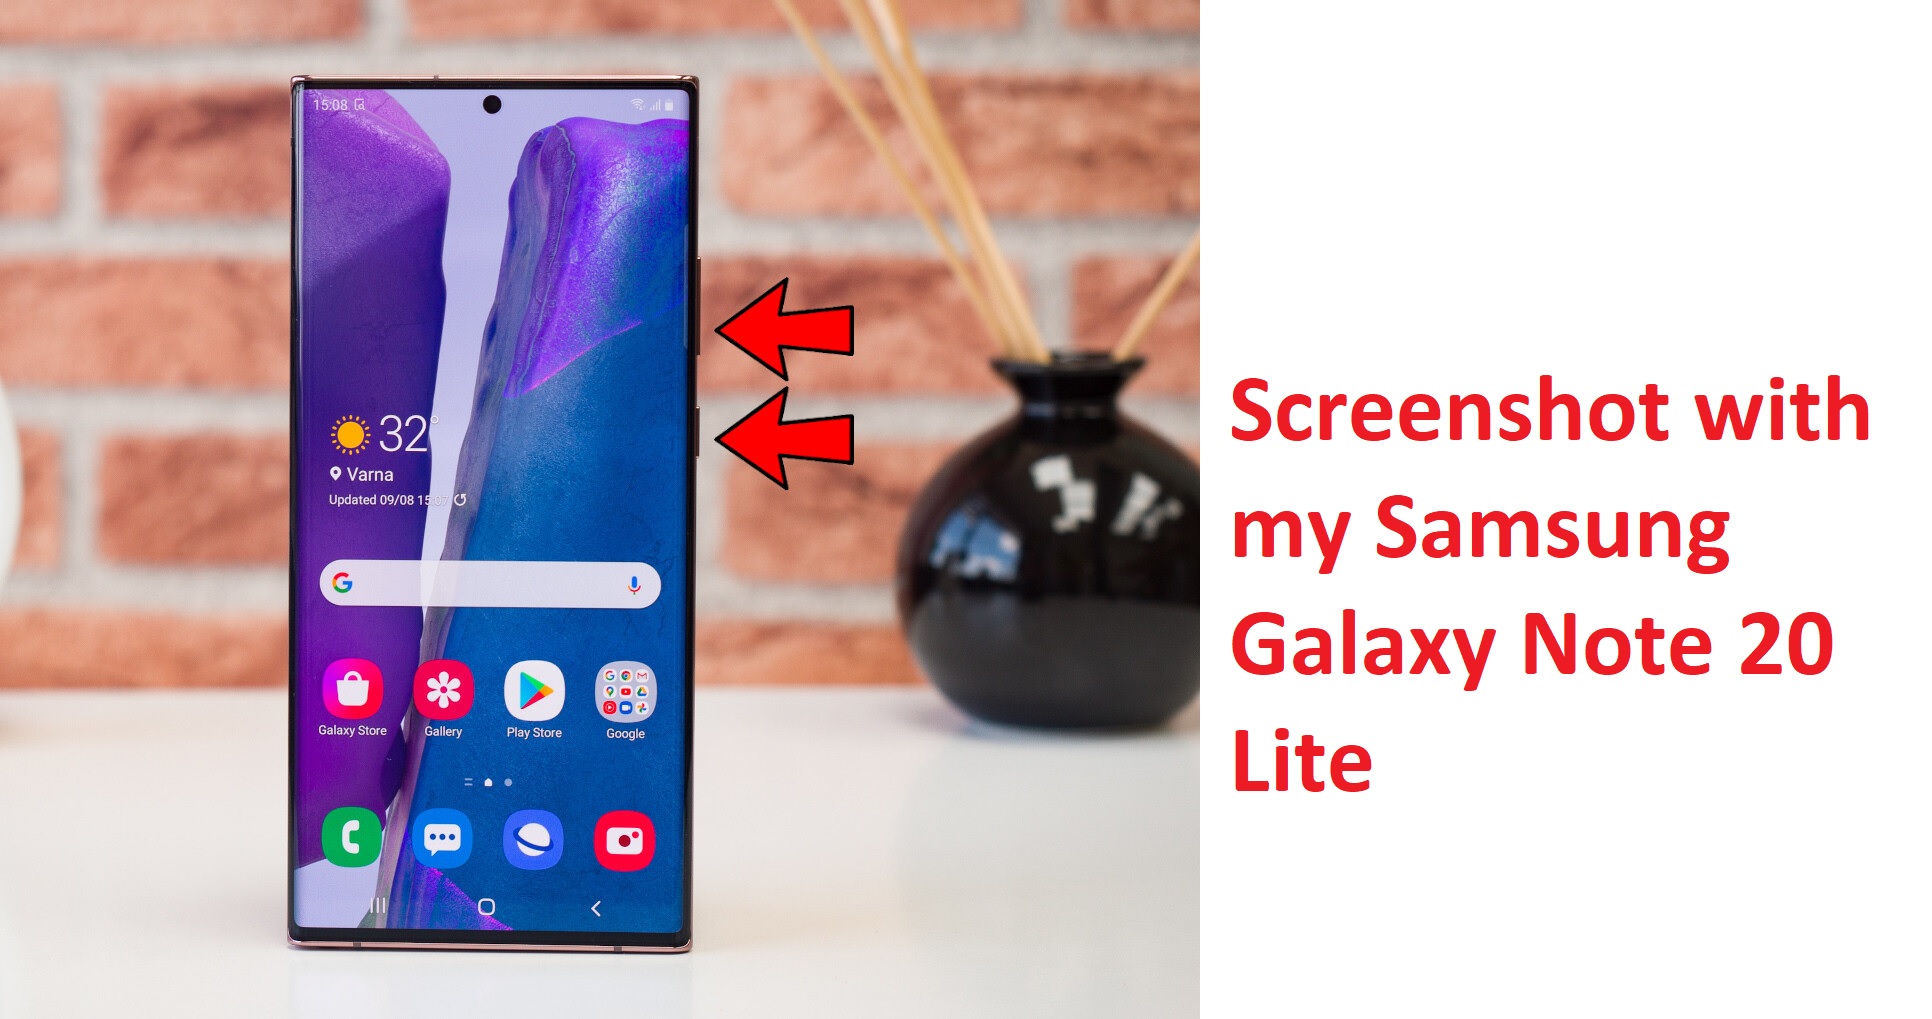 How to take a screenshot on Samsung Galaxy Note 20 Lite